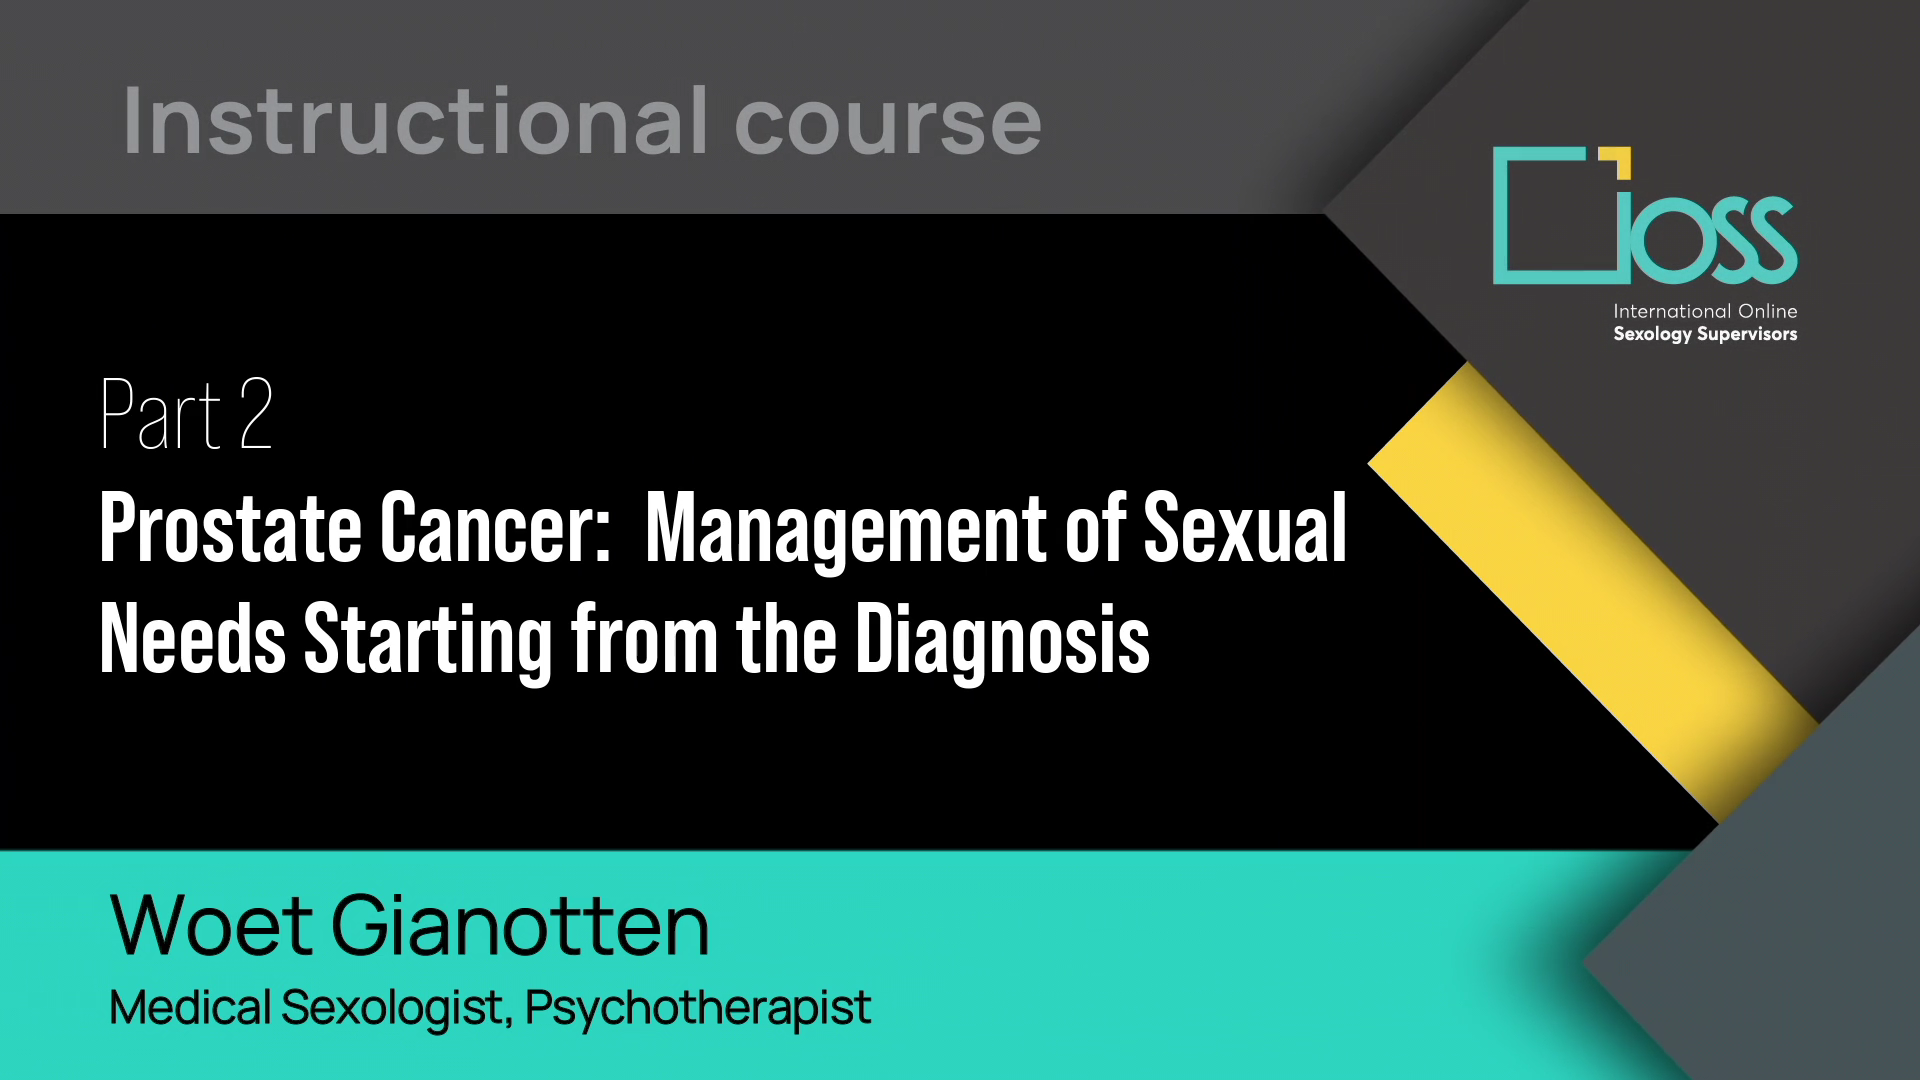 Part 2 Prostate Cancer: Management of Sexual Needs Starting from the Diagnosis (Part 1 & 2)